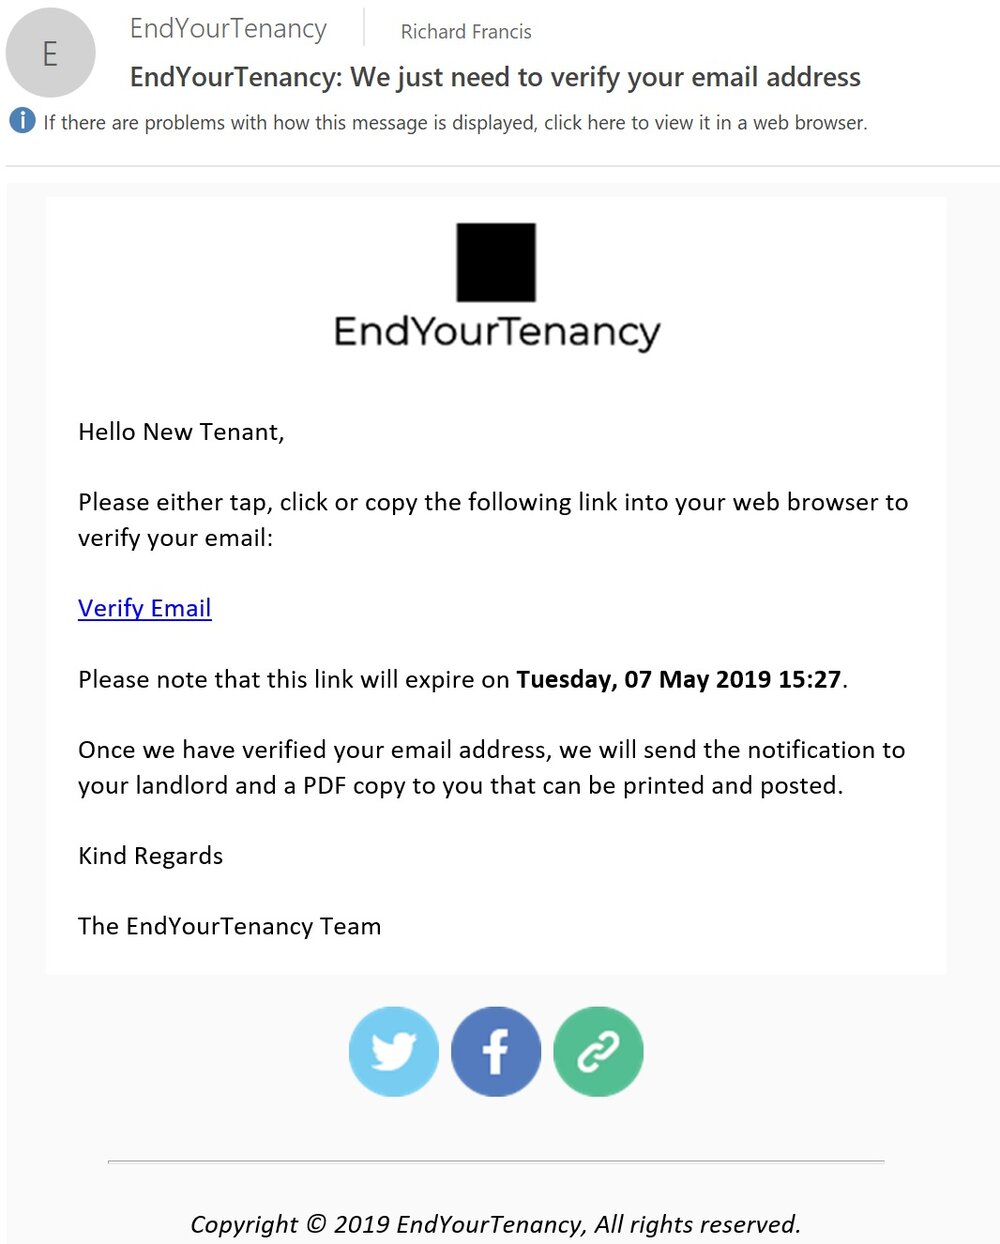 End of tenancy notice letter generator explained — End Your Tenancy